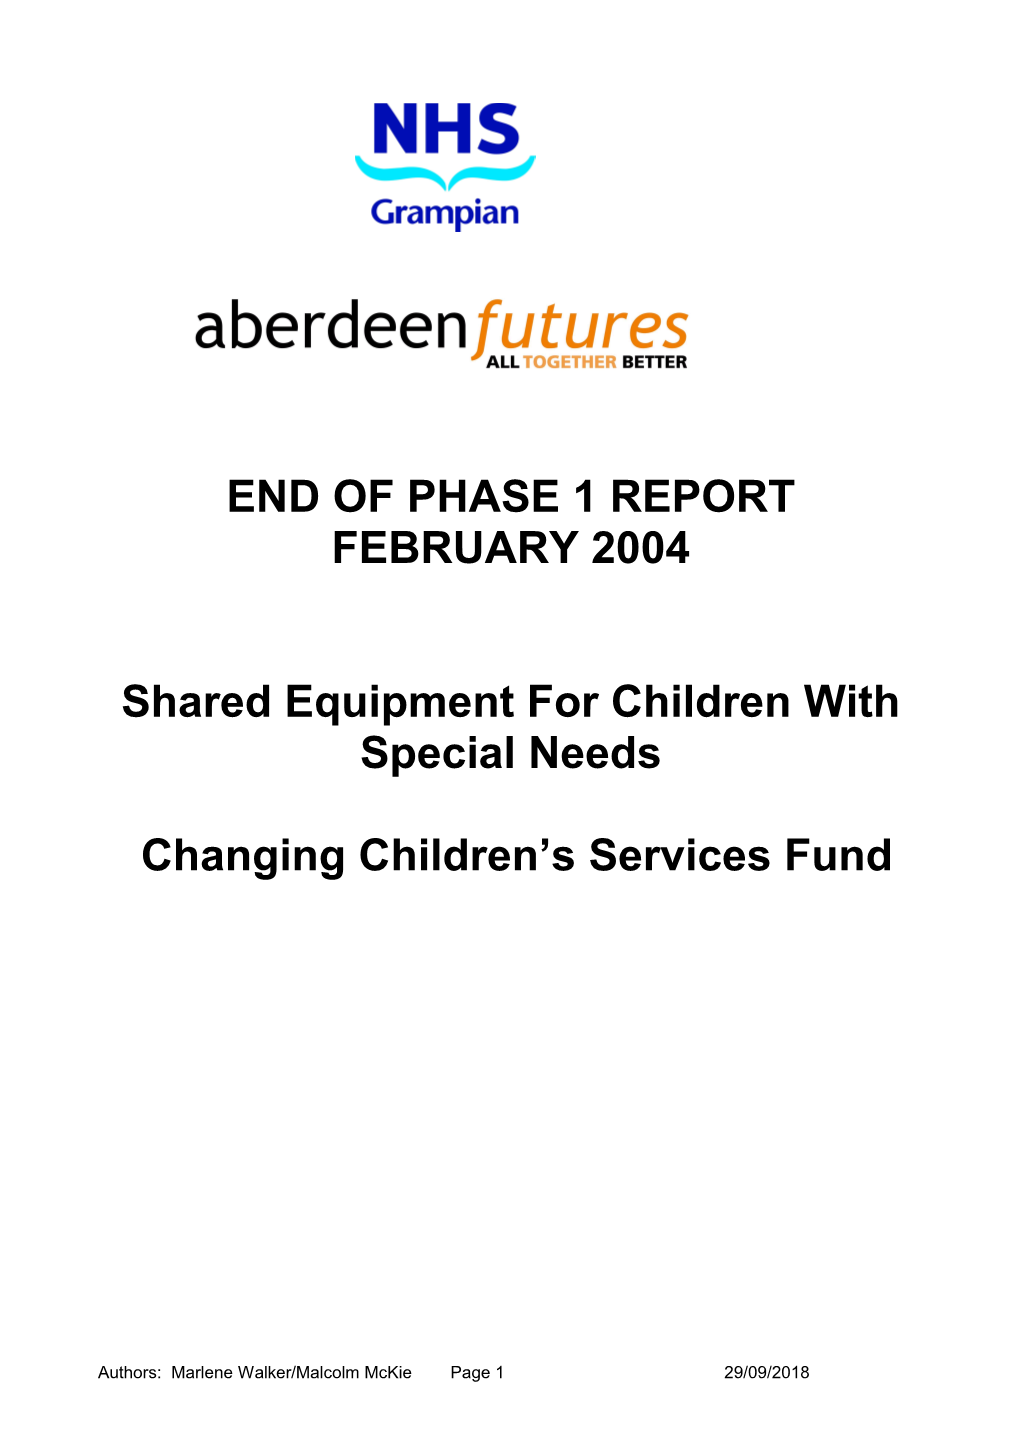 Annual & End of Phase 1 Report